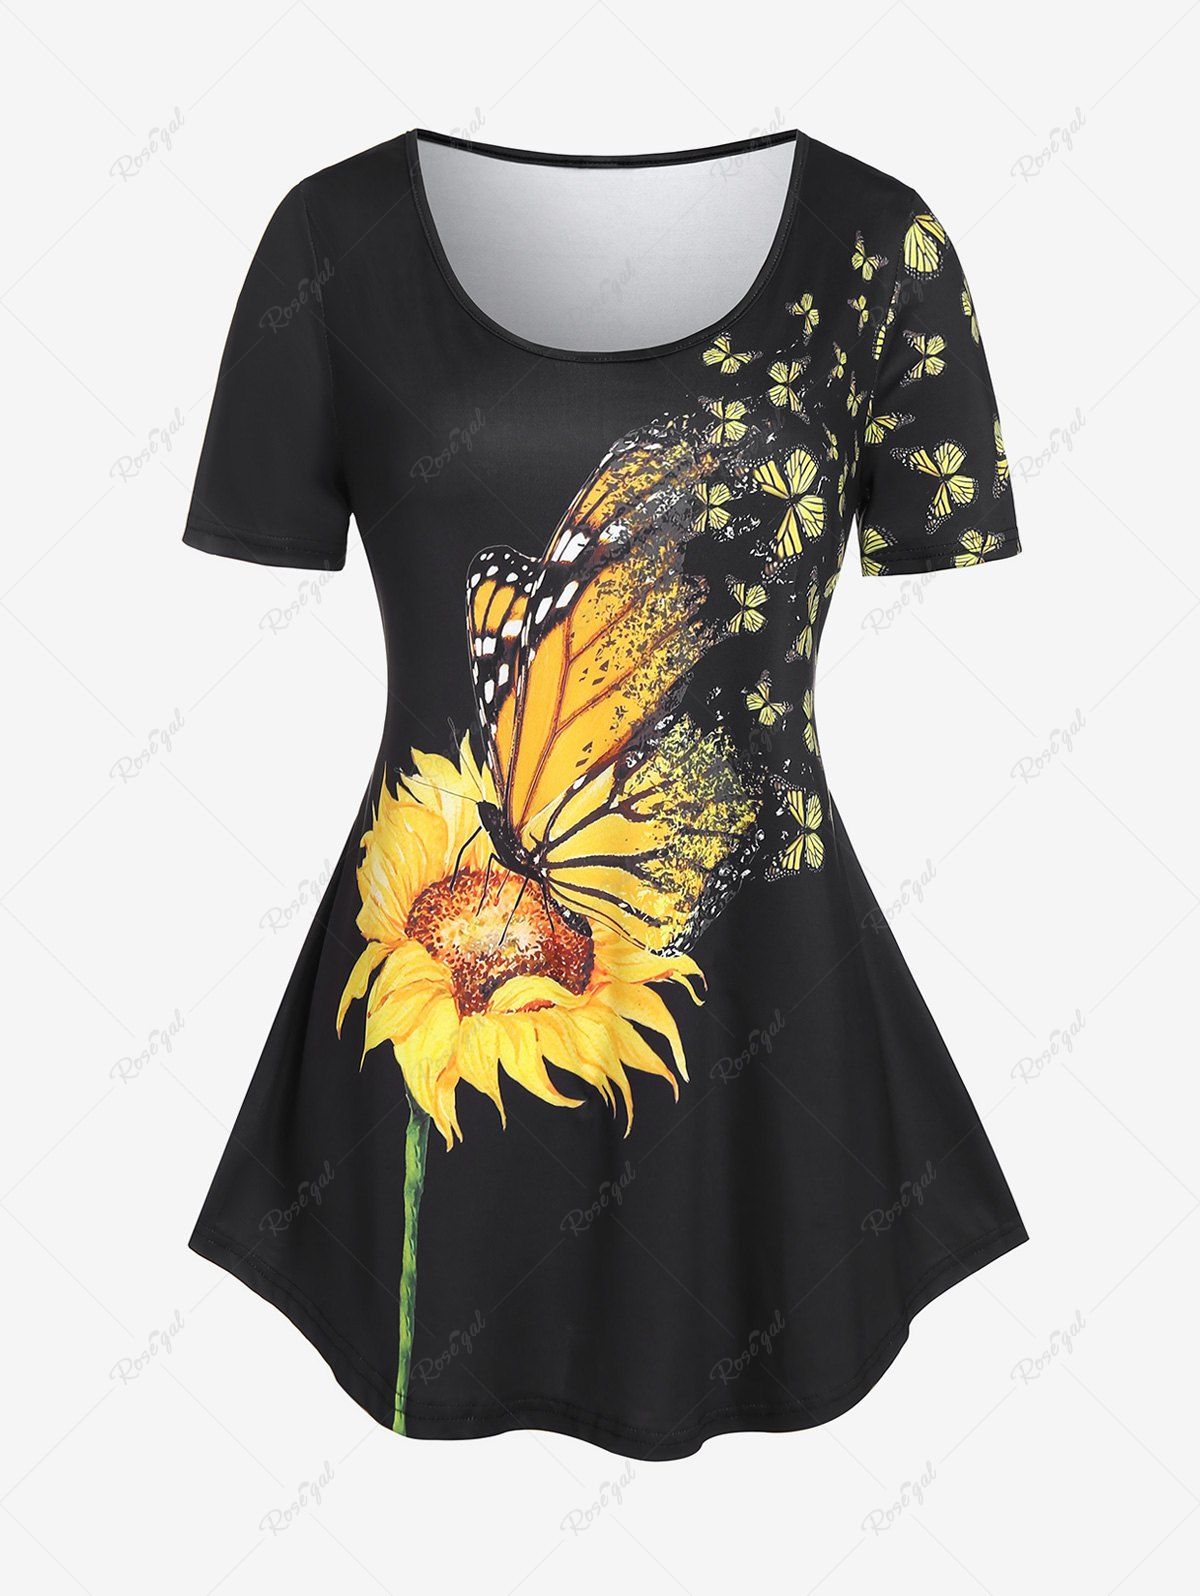 New Plus Size Sunflower Butterfly Printed T Shirt  